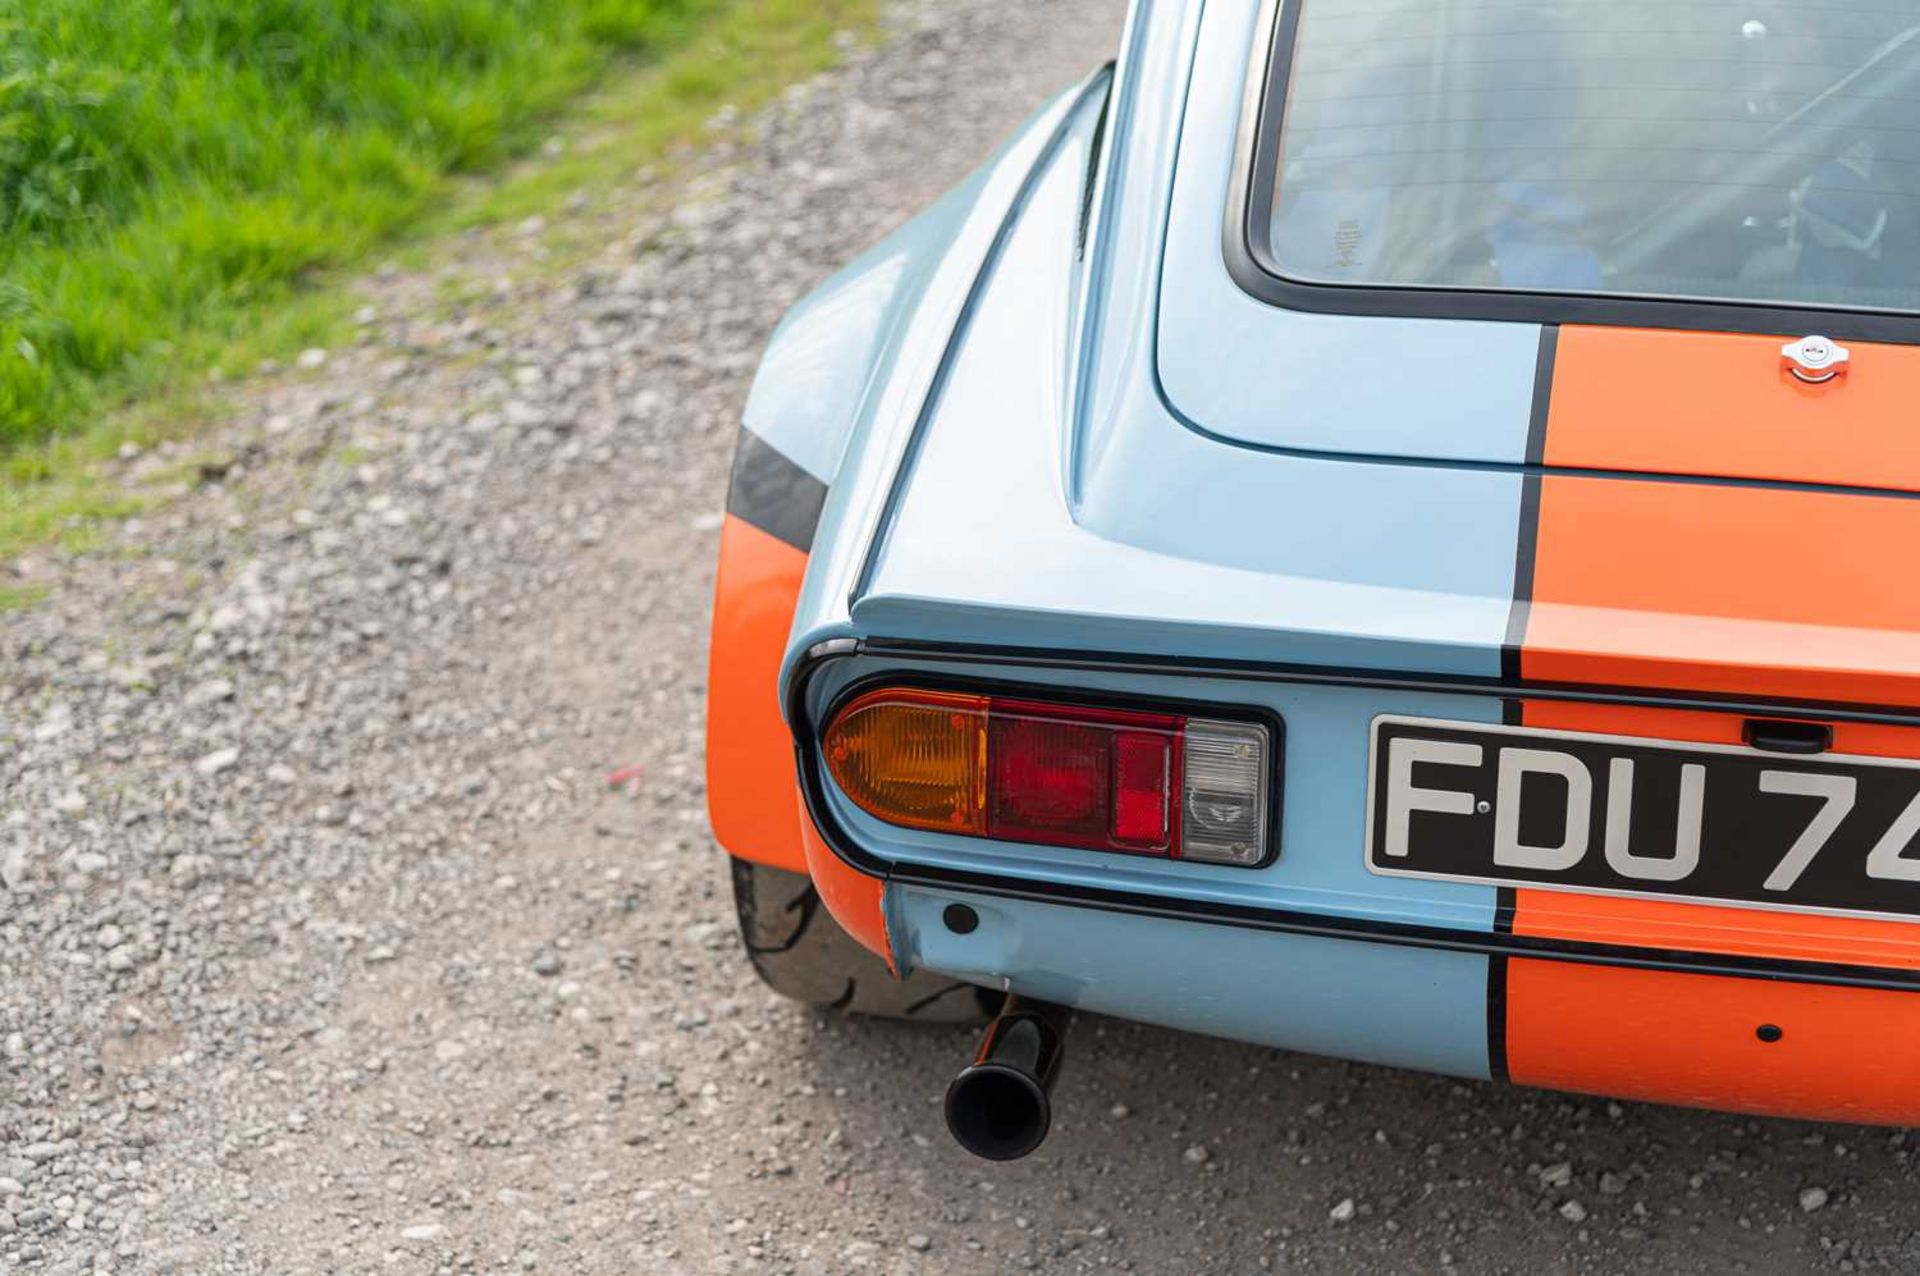 1973 Triumph GT6  ***NO RESERVE*** Presented in Gulf Racing-inspired paintwork, road-going track wea - Image 26 of 65